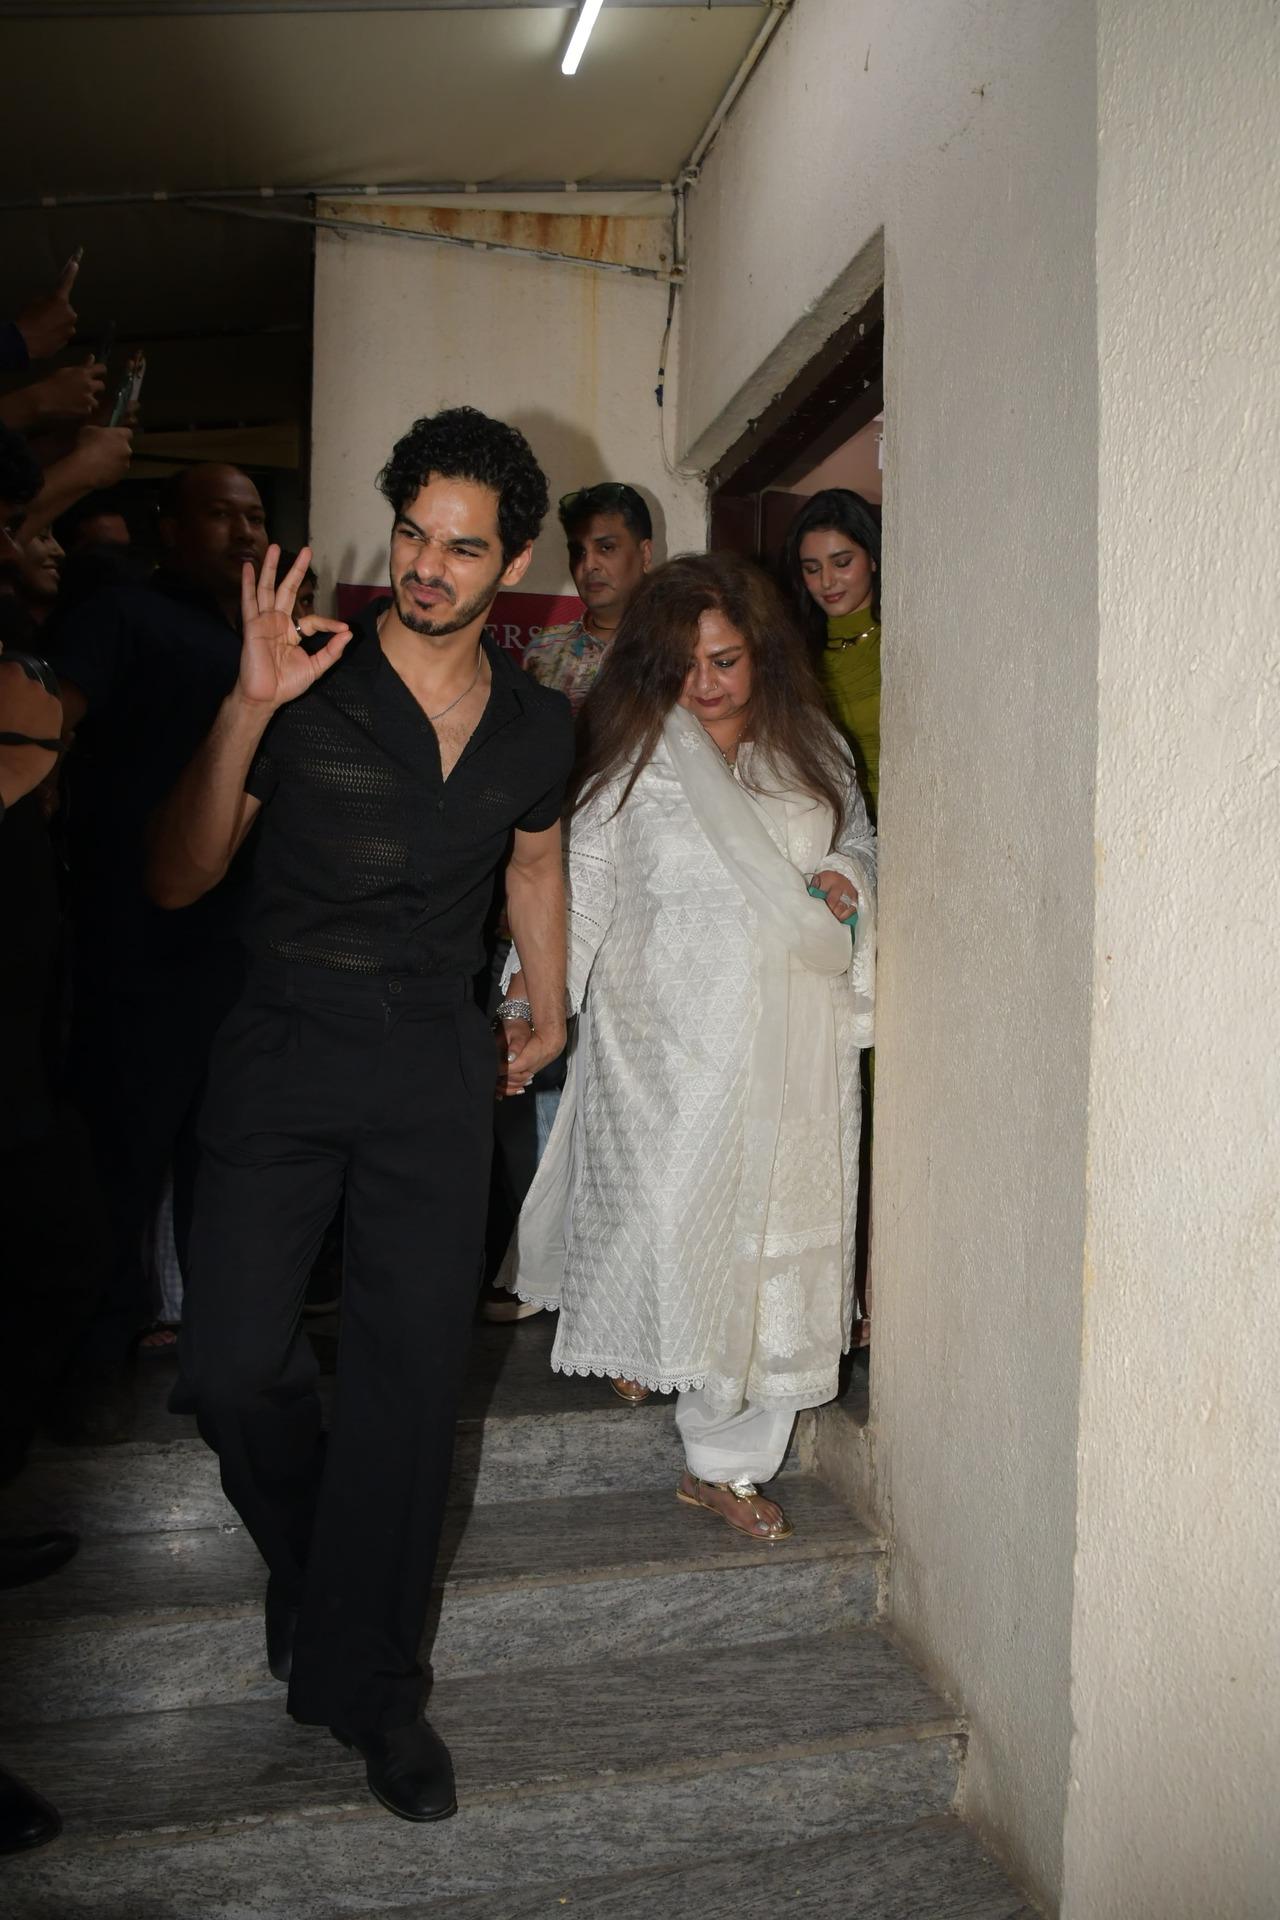 Is that Ishaan's review of the film? The actor was spotted leaving the theatre giving a thumbs up for the film when the paparazzi asked his opinion of the film